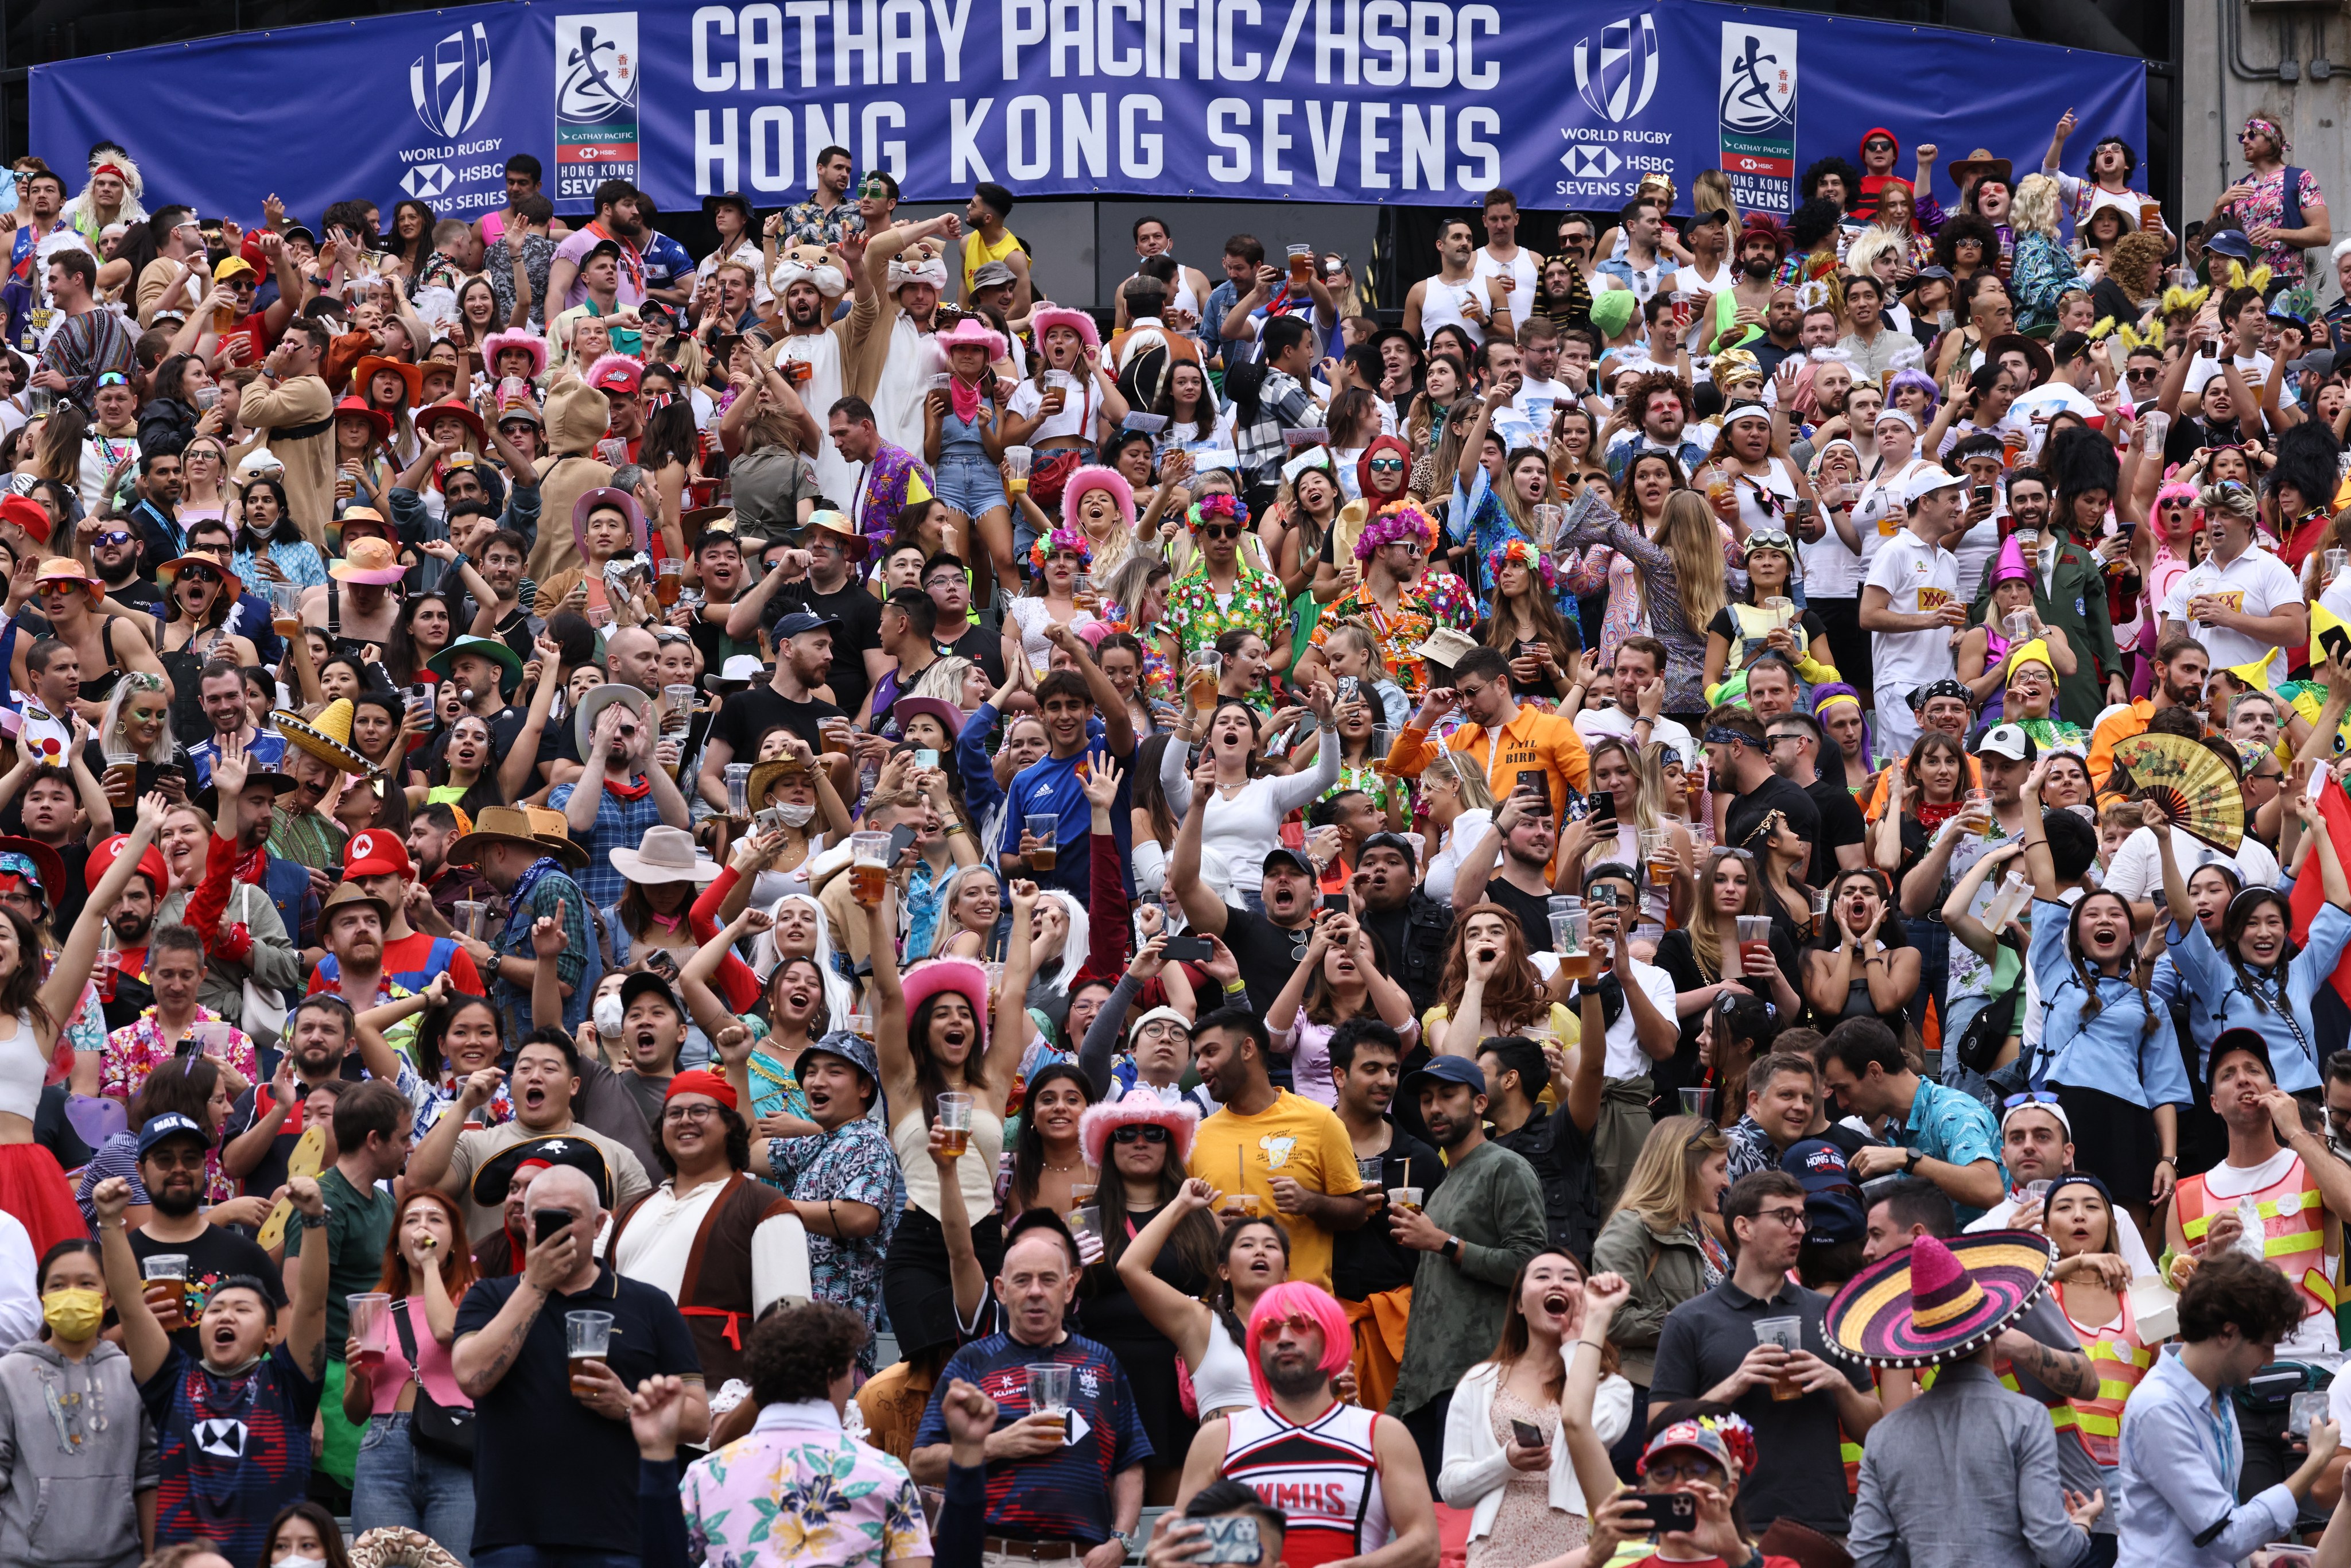 Fans in the South Stand on day 2 of the 2022 Cathay Pacific/HSBC Hong Kong Sevens. Photo: K.Y. Cheng